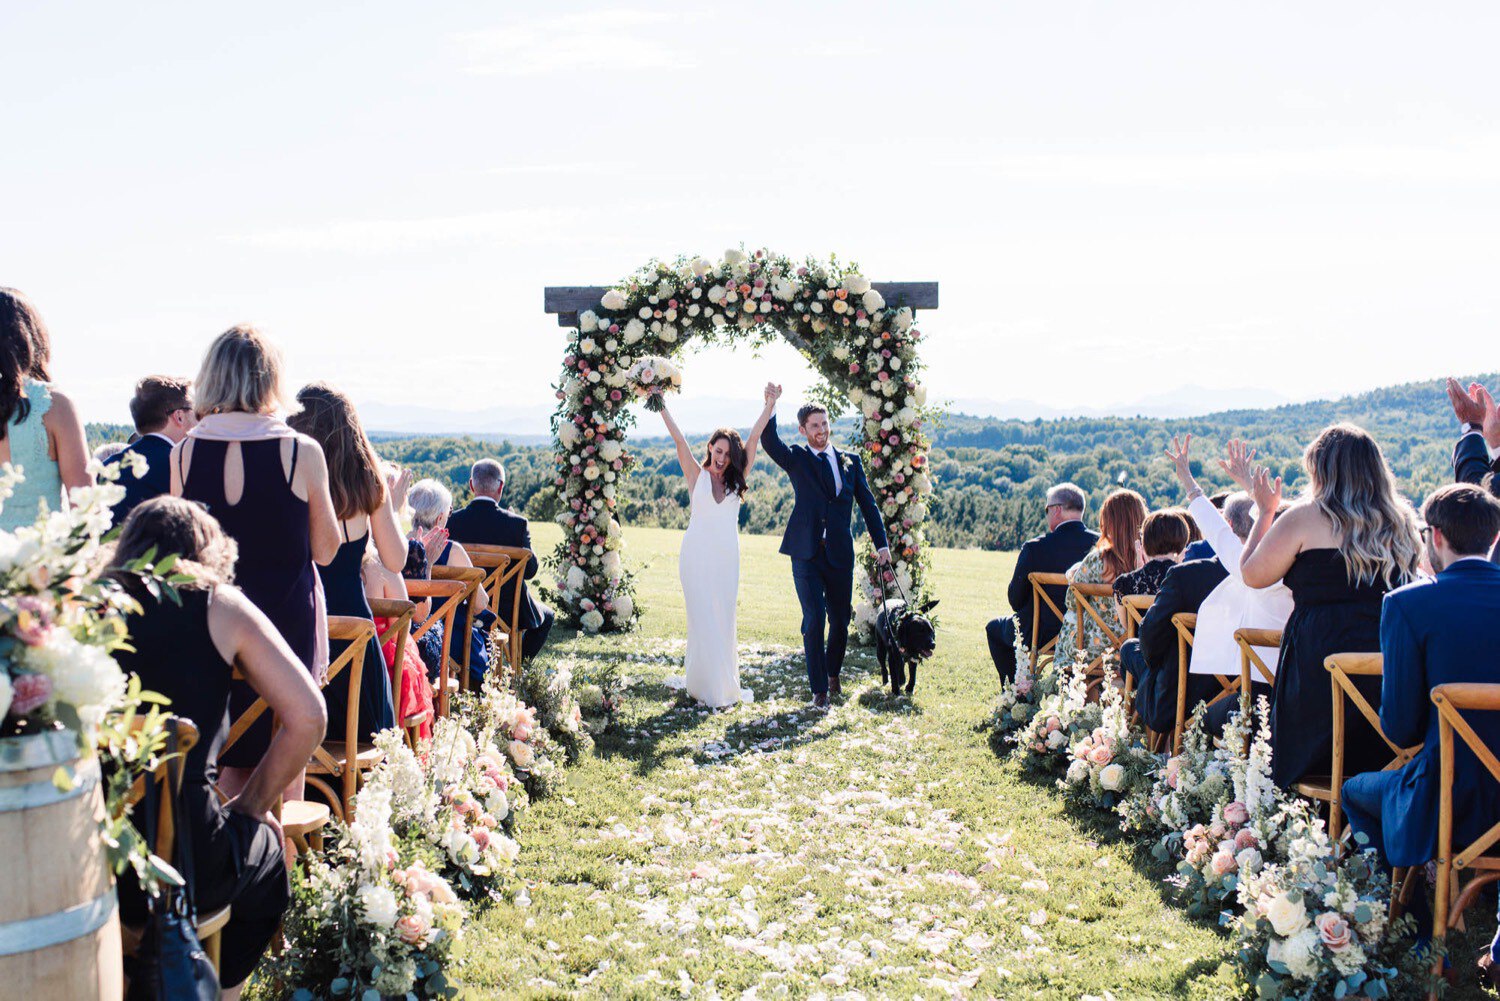 Newlyweds celebrate during recessional, outdoor wedding ceremony